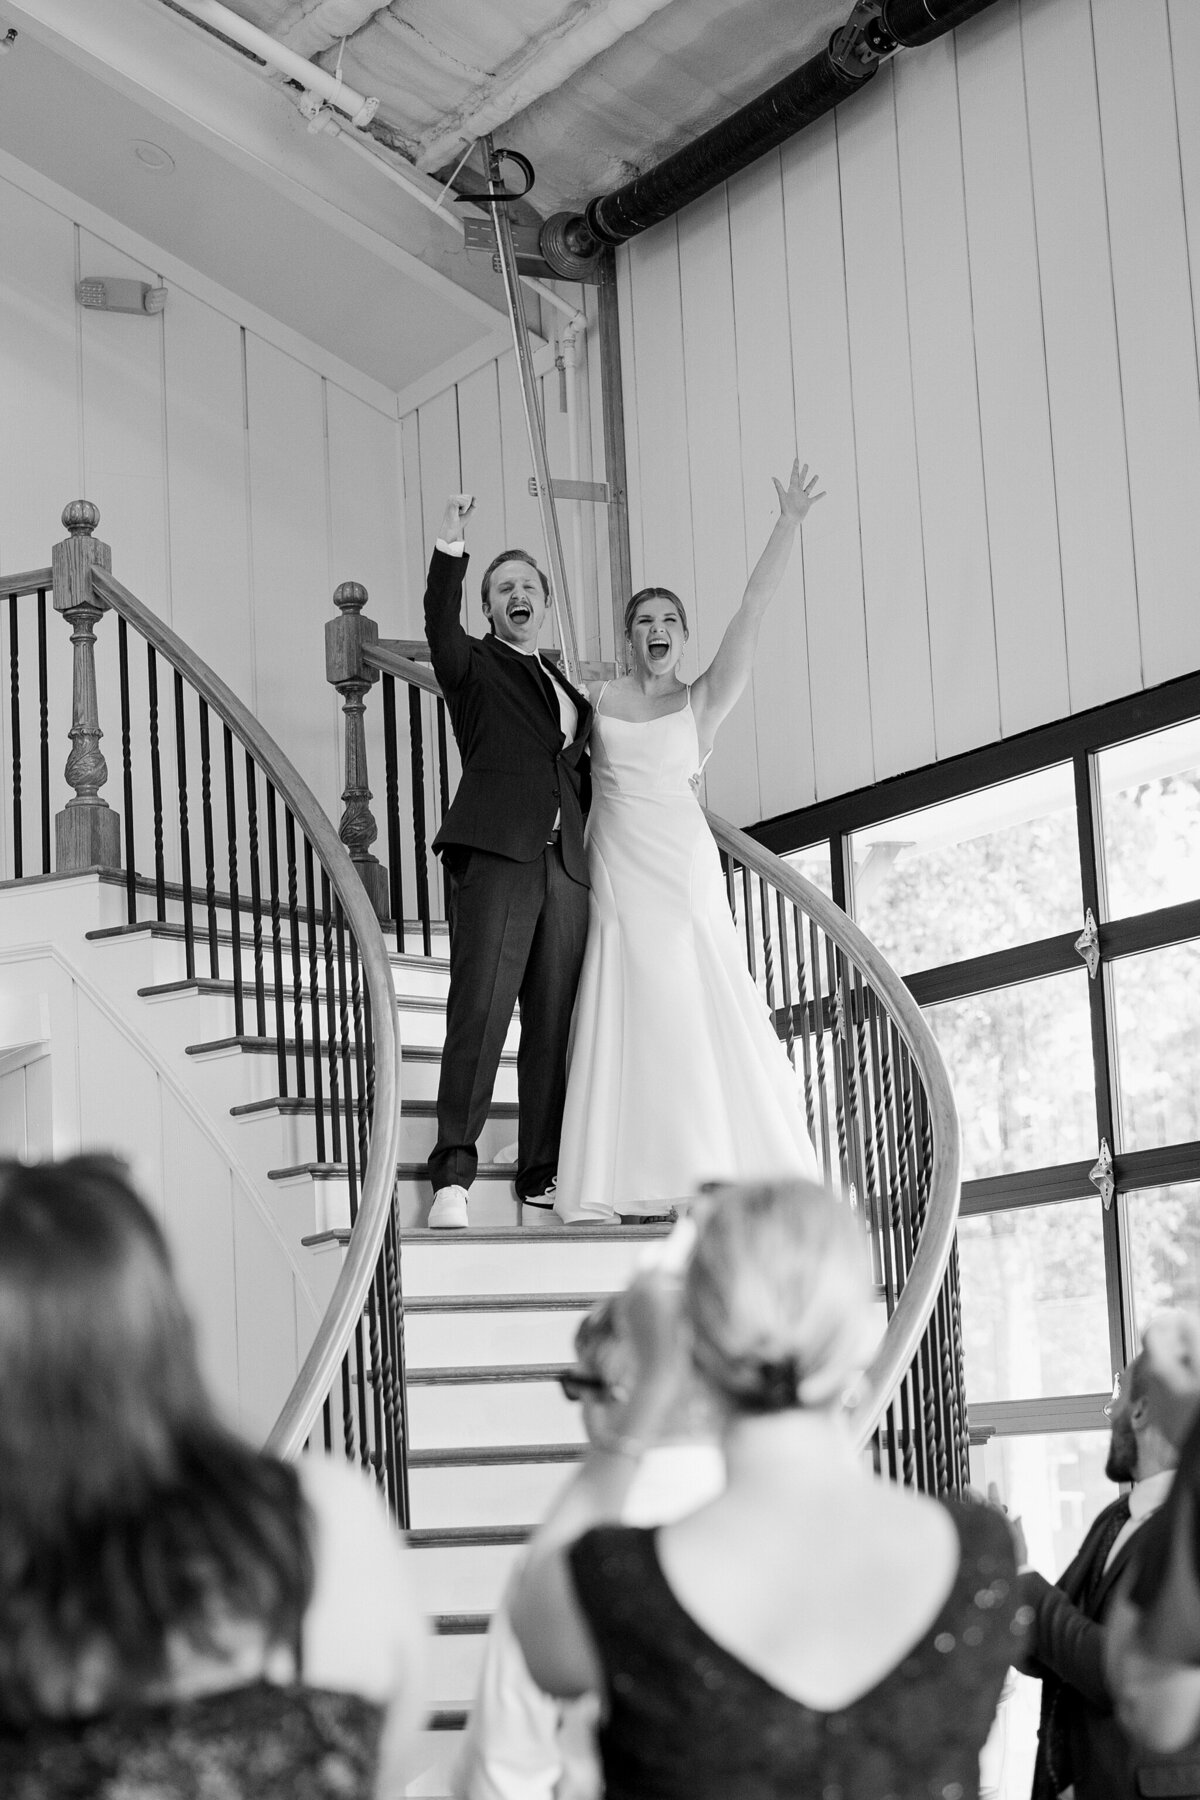 A couple making their entrance to their reception at a wedding at Bella Cavalli Events in Aubrey, Texas. The groom on the left is wearing a dark suit with white shoes, is holding the bride around the waist, is holding his other hand up in celebration, and is cheering. The bride on the right is doing the same except for wearing a white wedding dress. Guests can be seen in the foreground looking up at the couple as they descend a staircase.